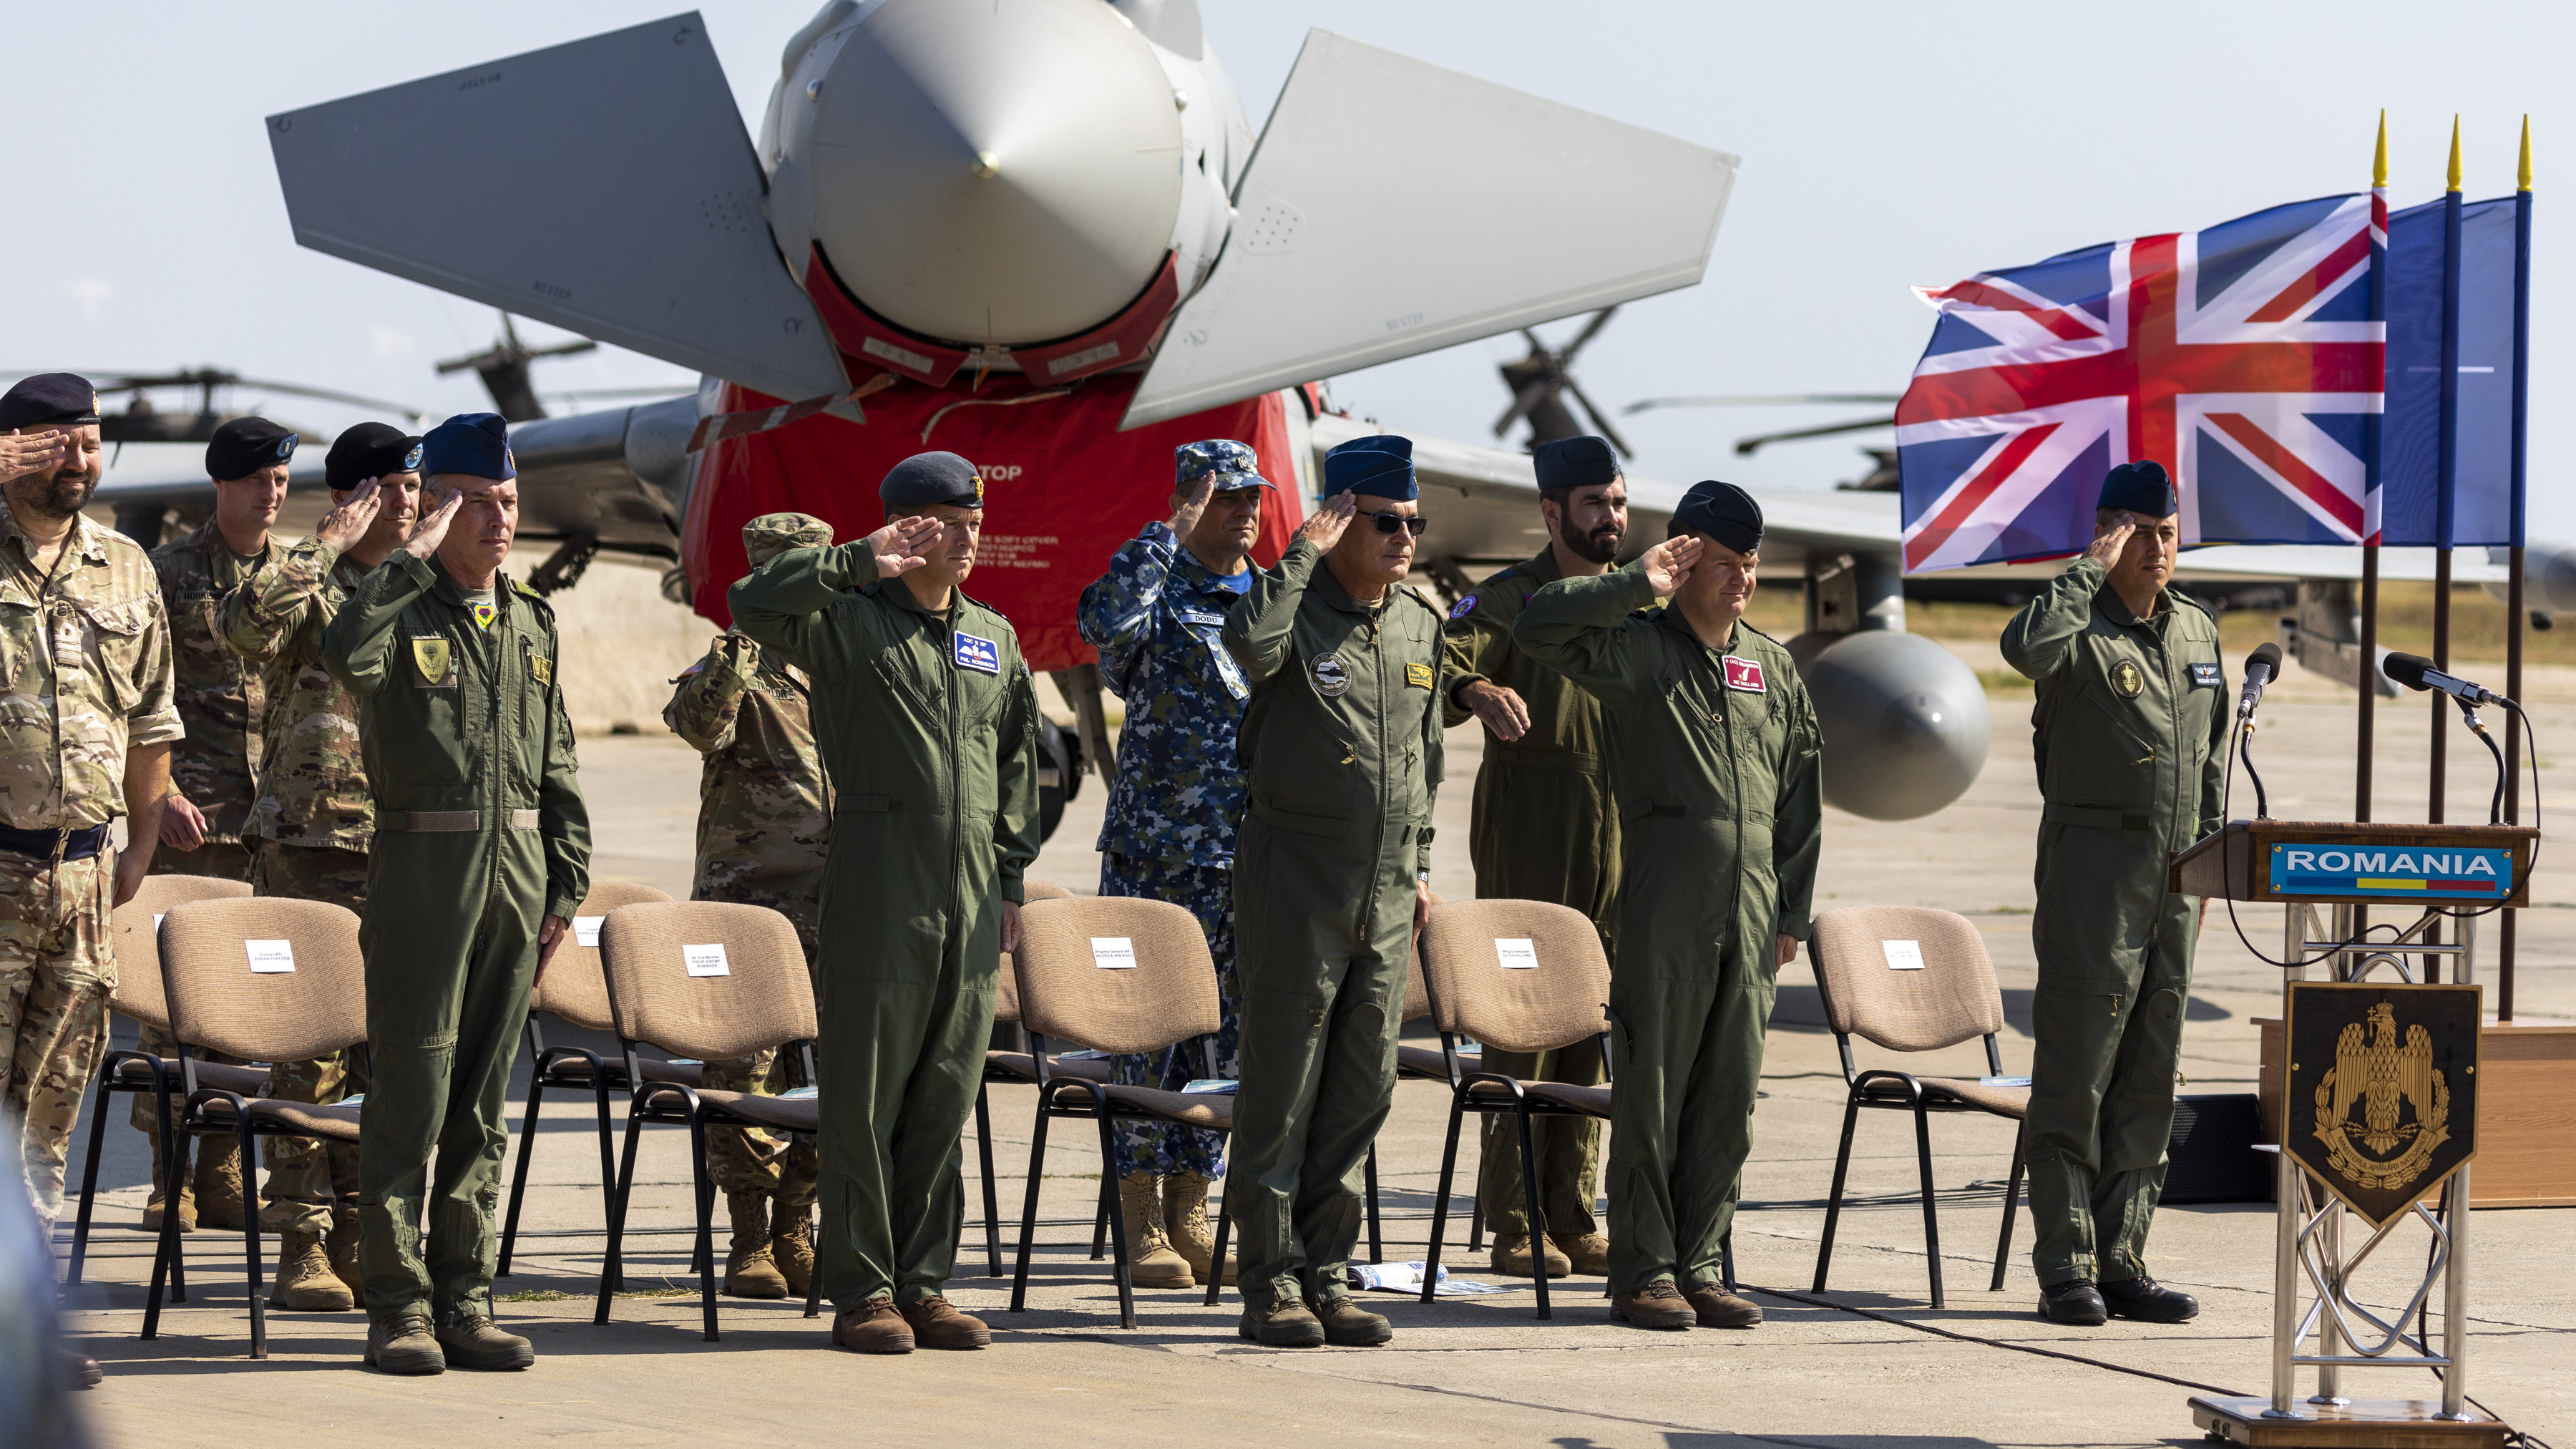 Image shows Squadron saluting by chairs with aircraft and flags in the background.